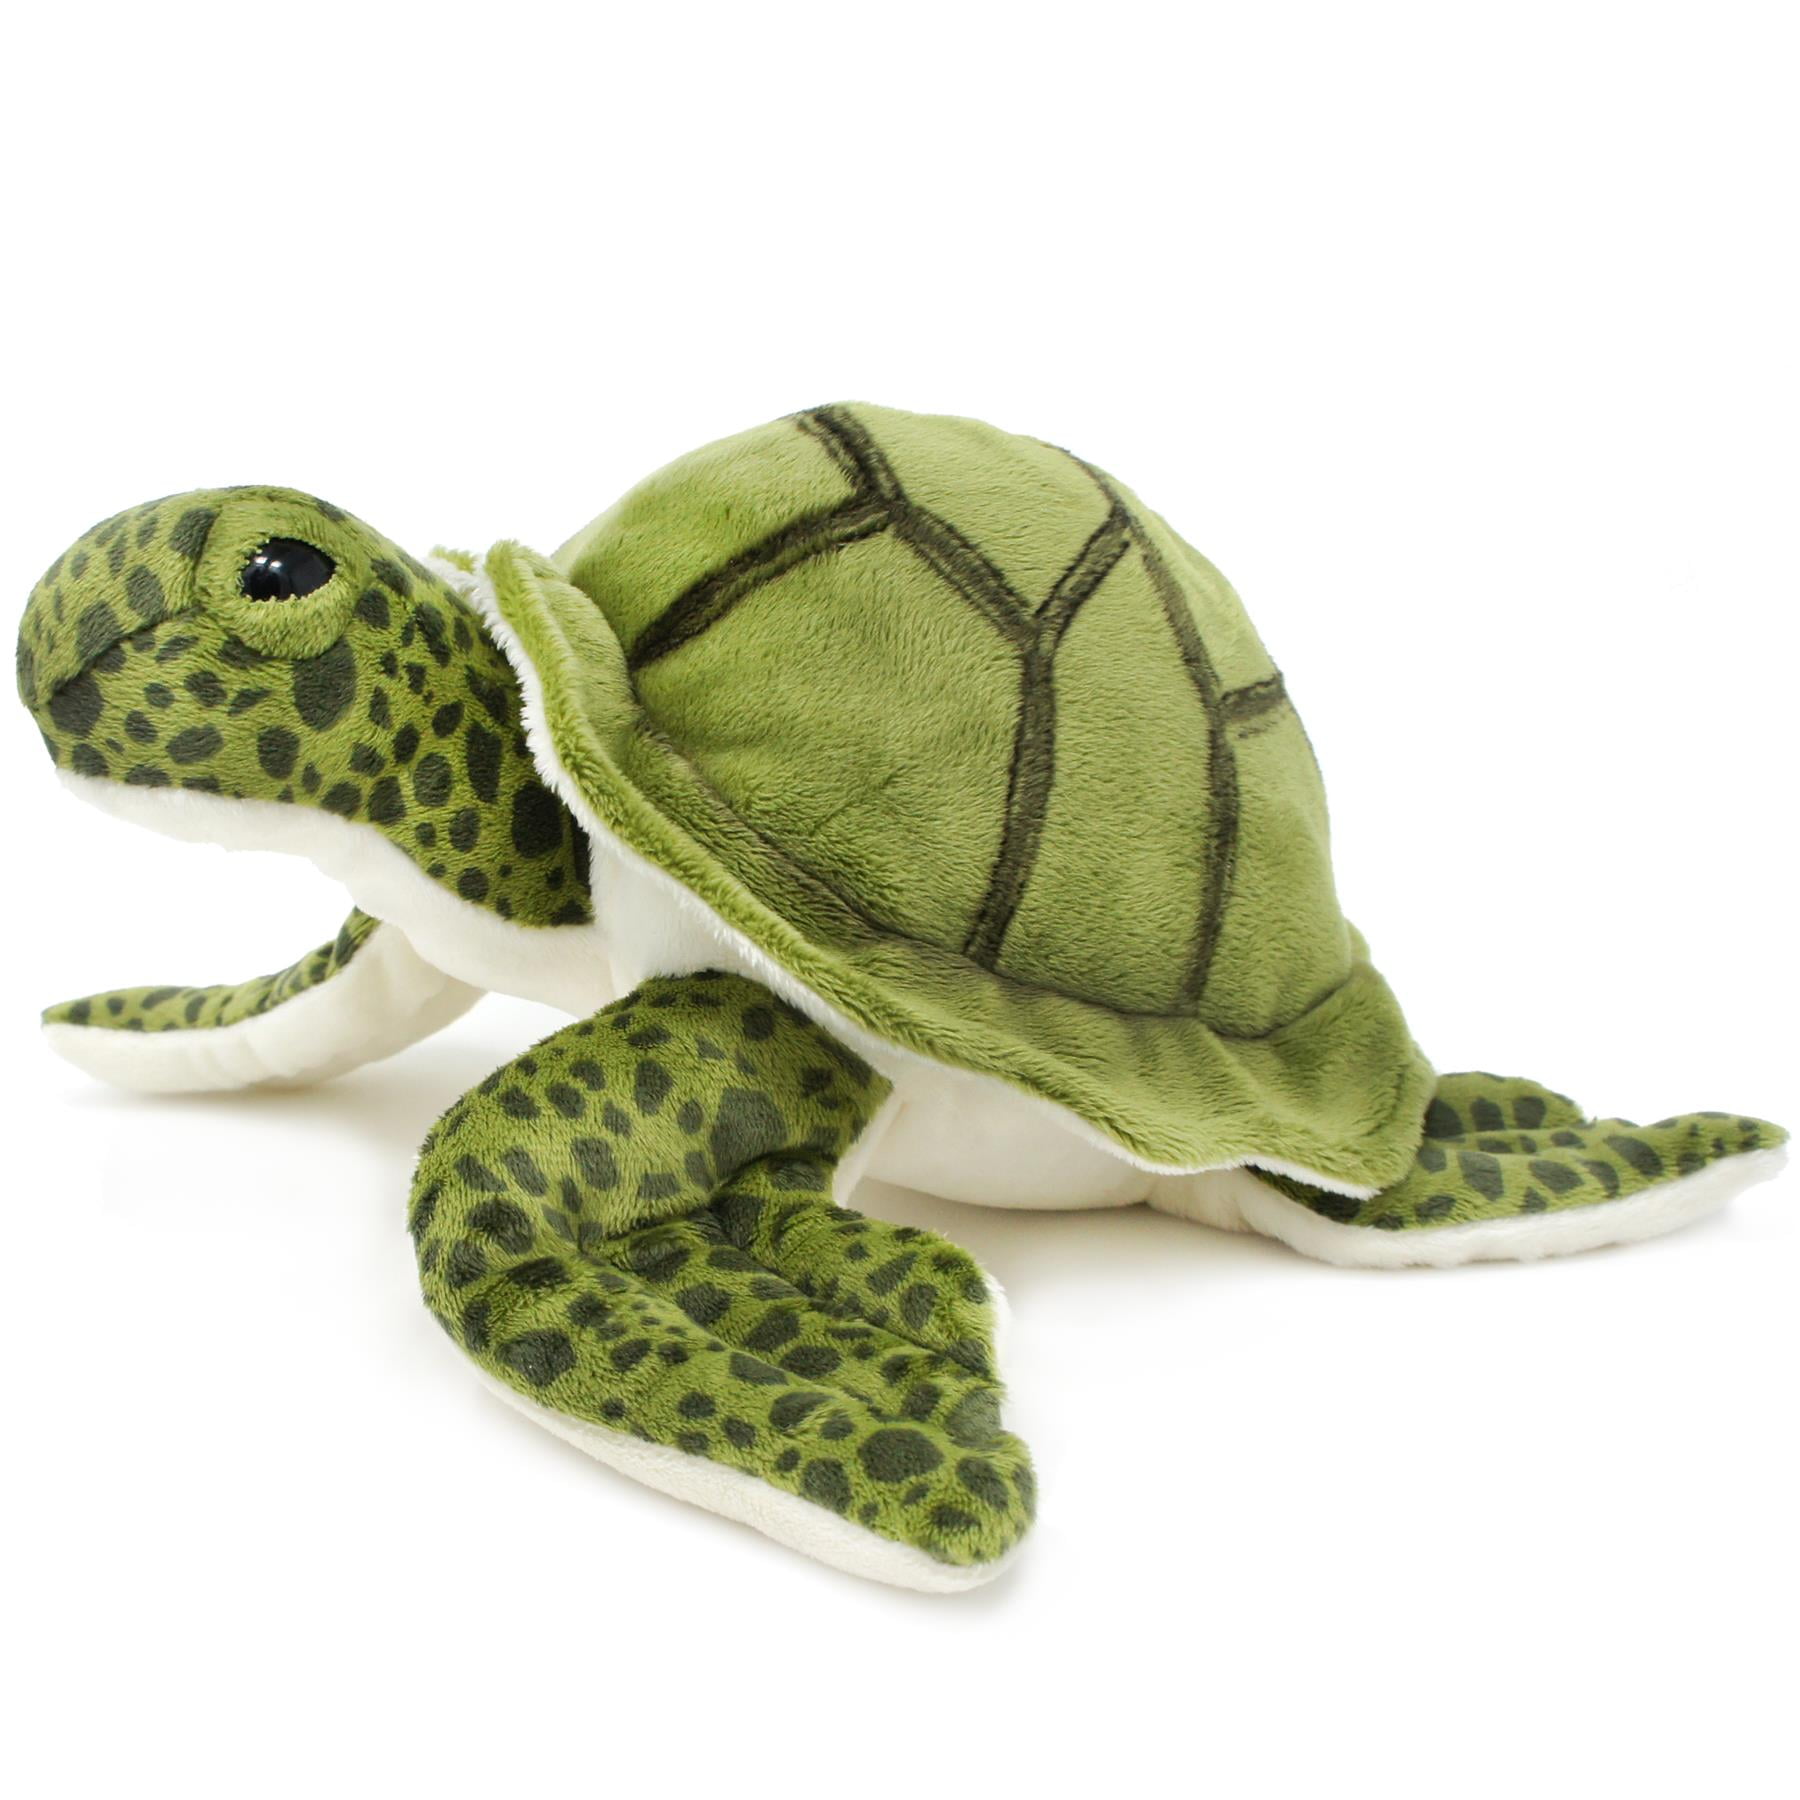 Details about   Fiesta 9" SEA TURTLE  Plush Toy 